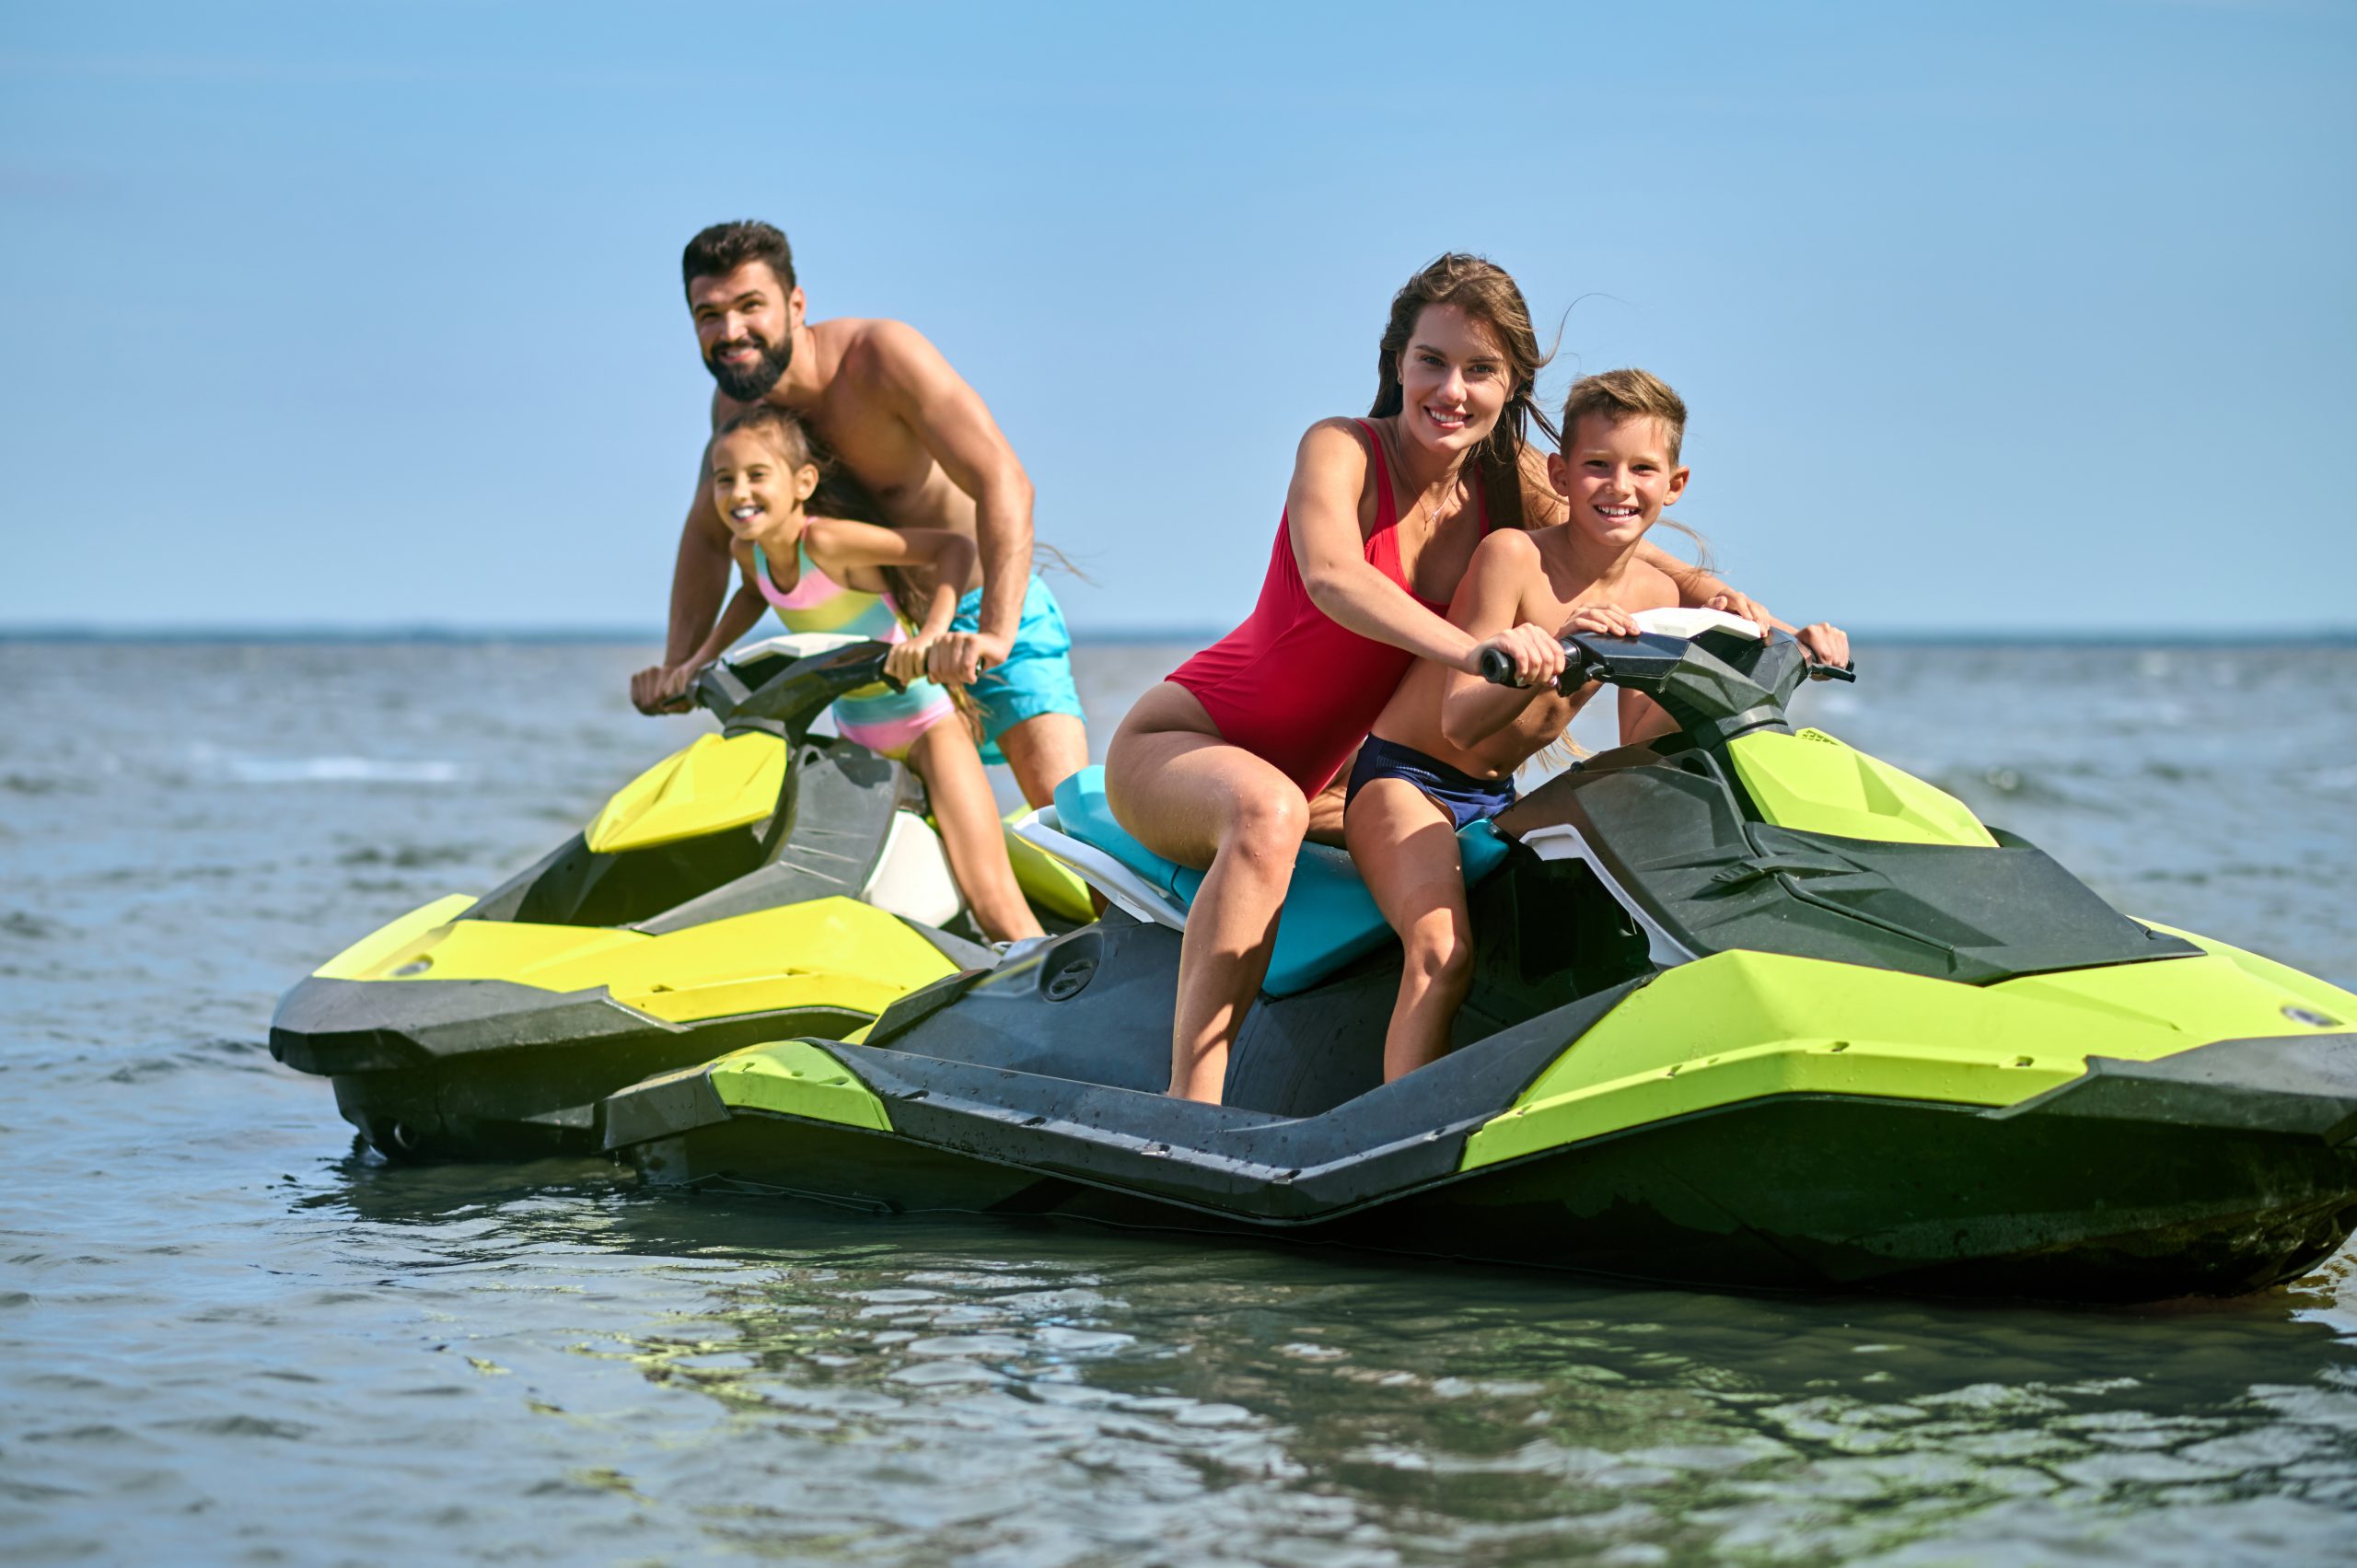 Father, mother, daughter and son racing on jet-skis enjoying watercraft in ocean, active summertime.